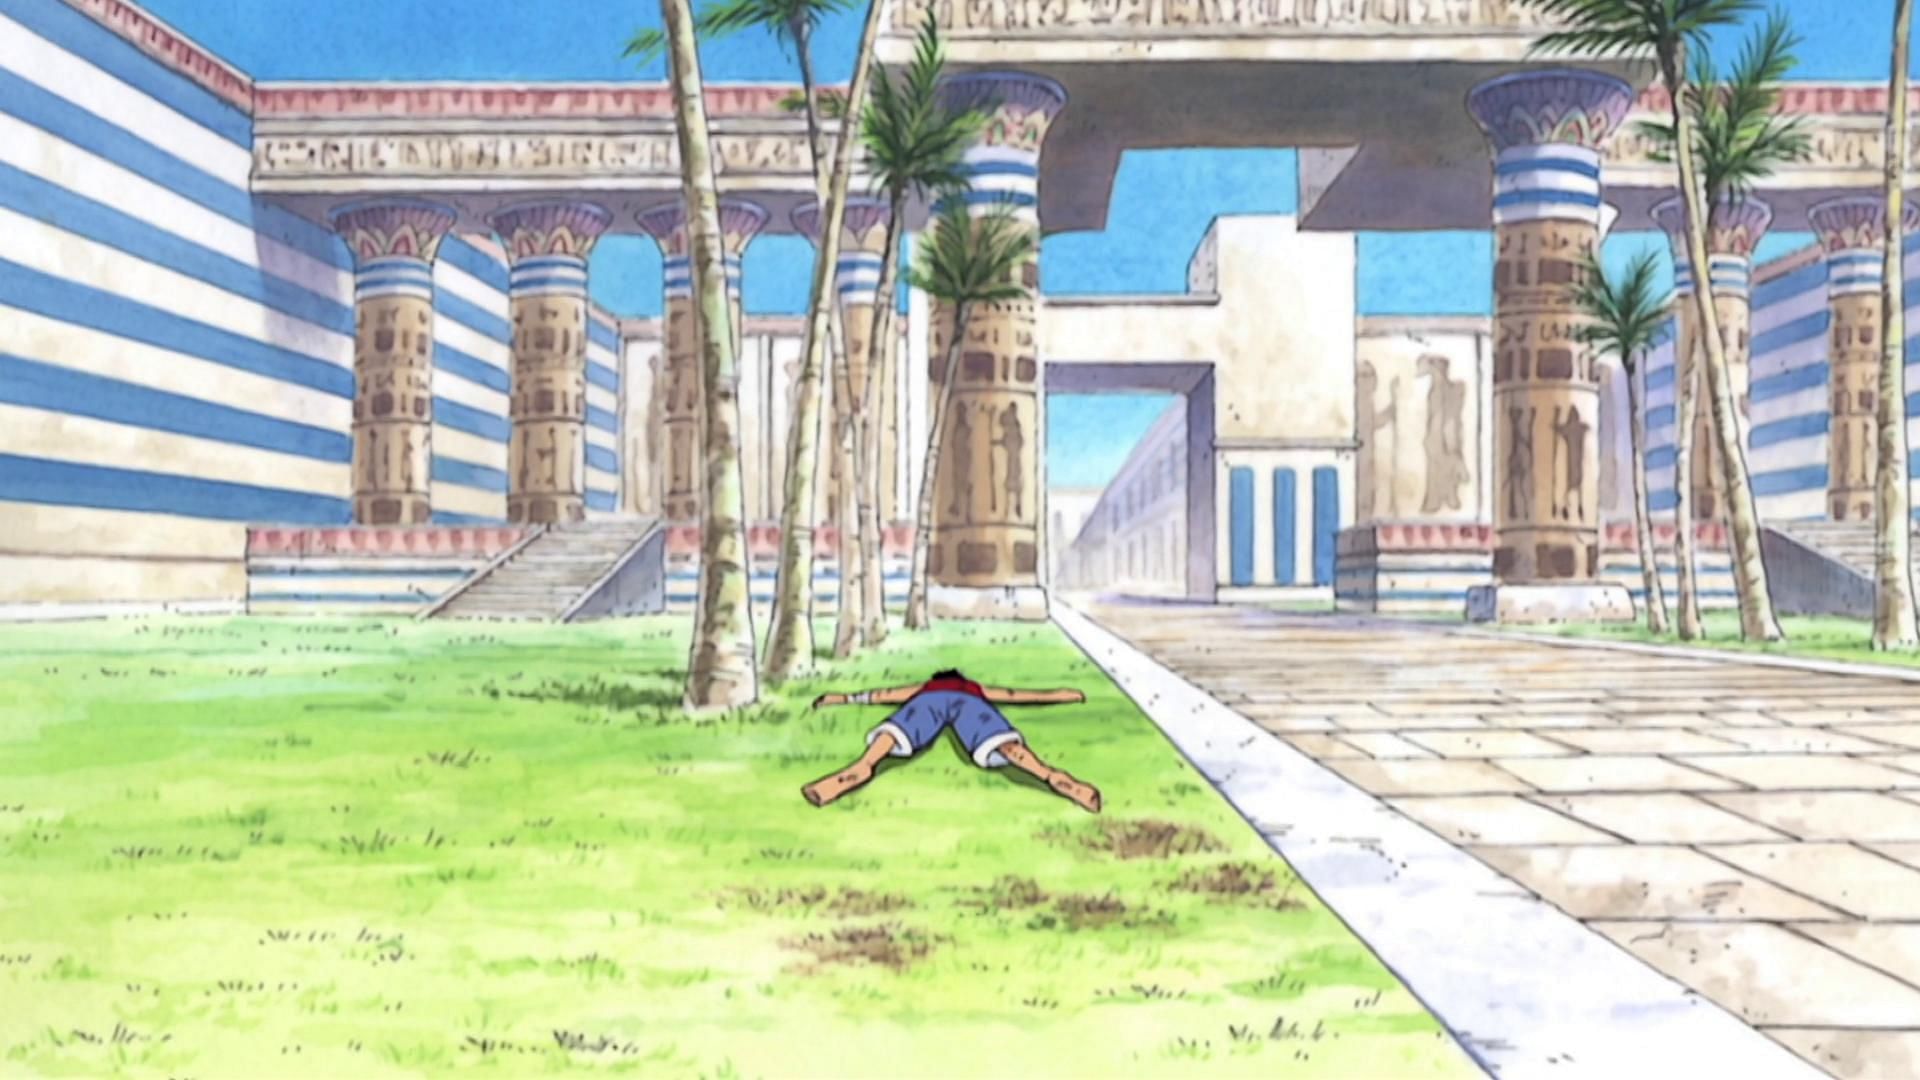 The Tomb of Kings in Arabasta (Image via Toei Animation, One Piece)